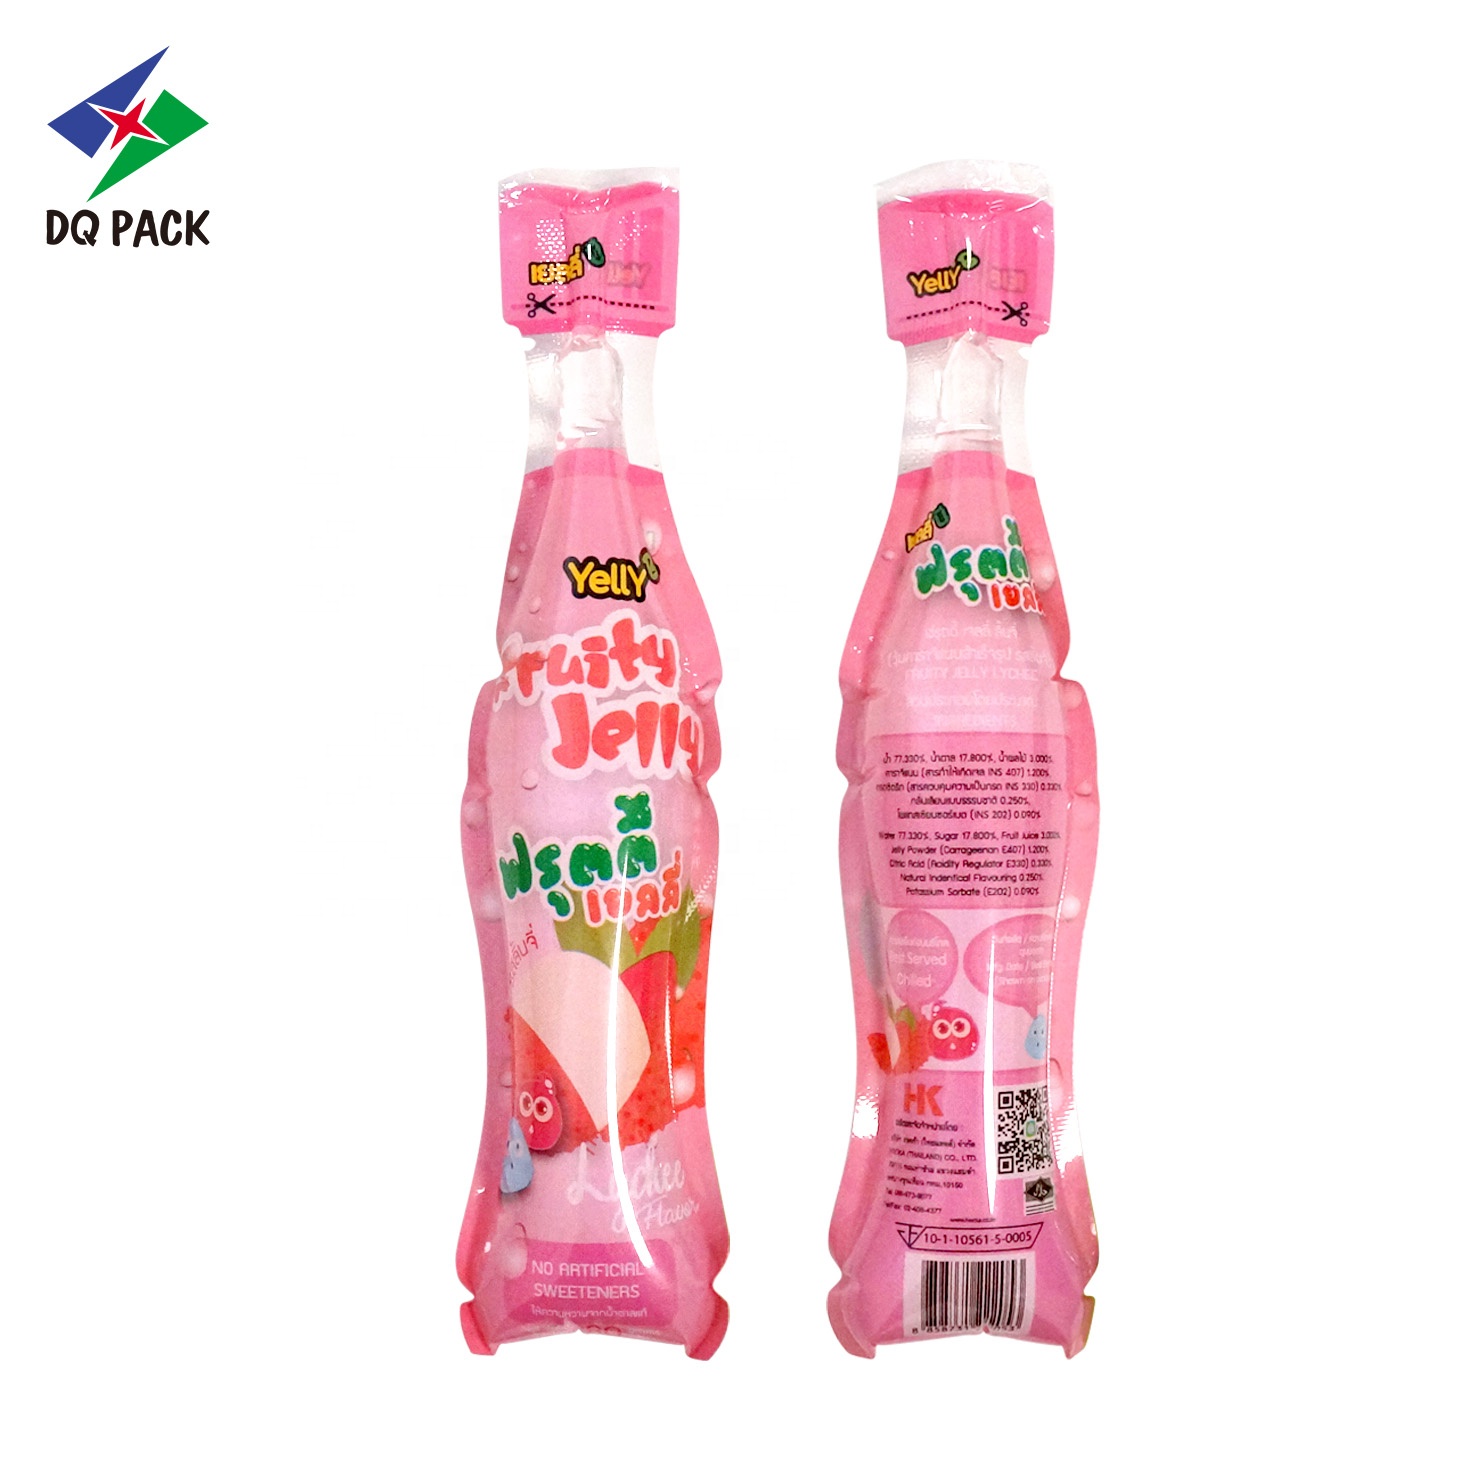 DQ PACK Hot Sale 80ml/100ml/120ml Bottle Shape Juice Liquid drink packaging Pouch Bag For Filling Machine